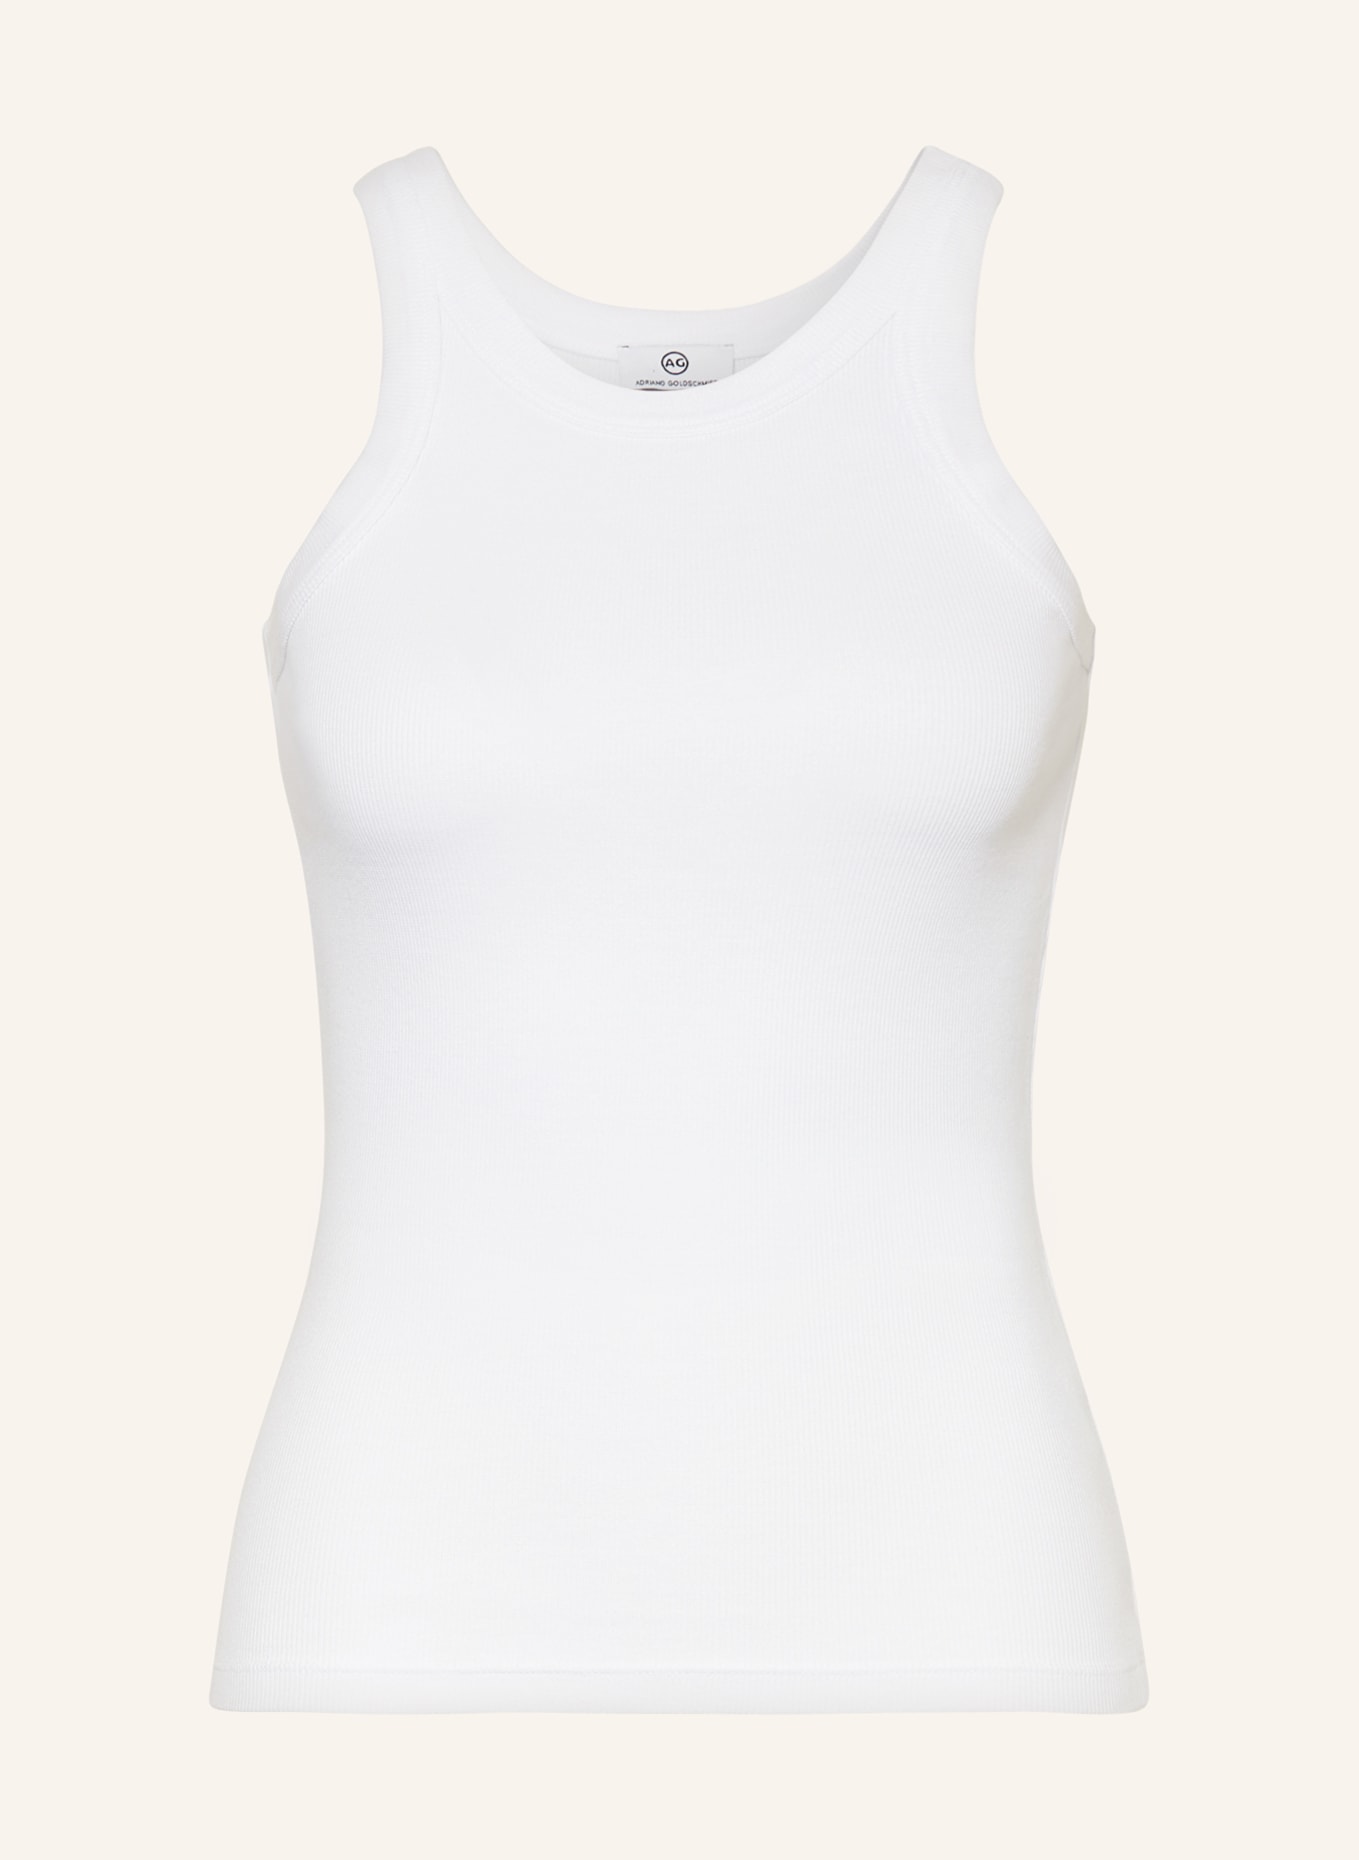 AG Jeans Top, Farbe: WEISS (Bild 1)